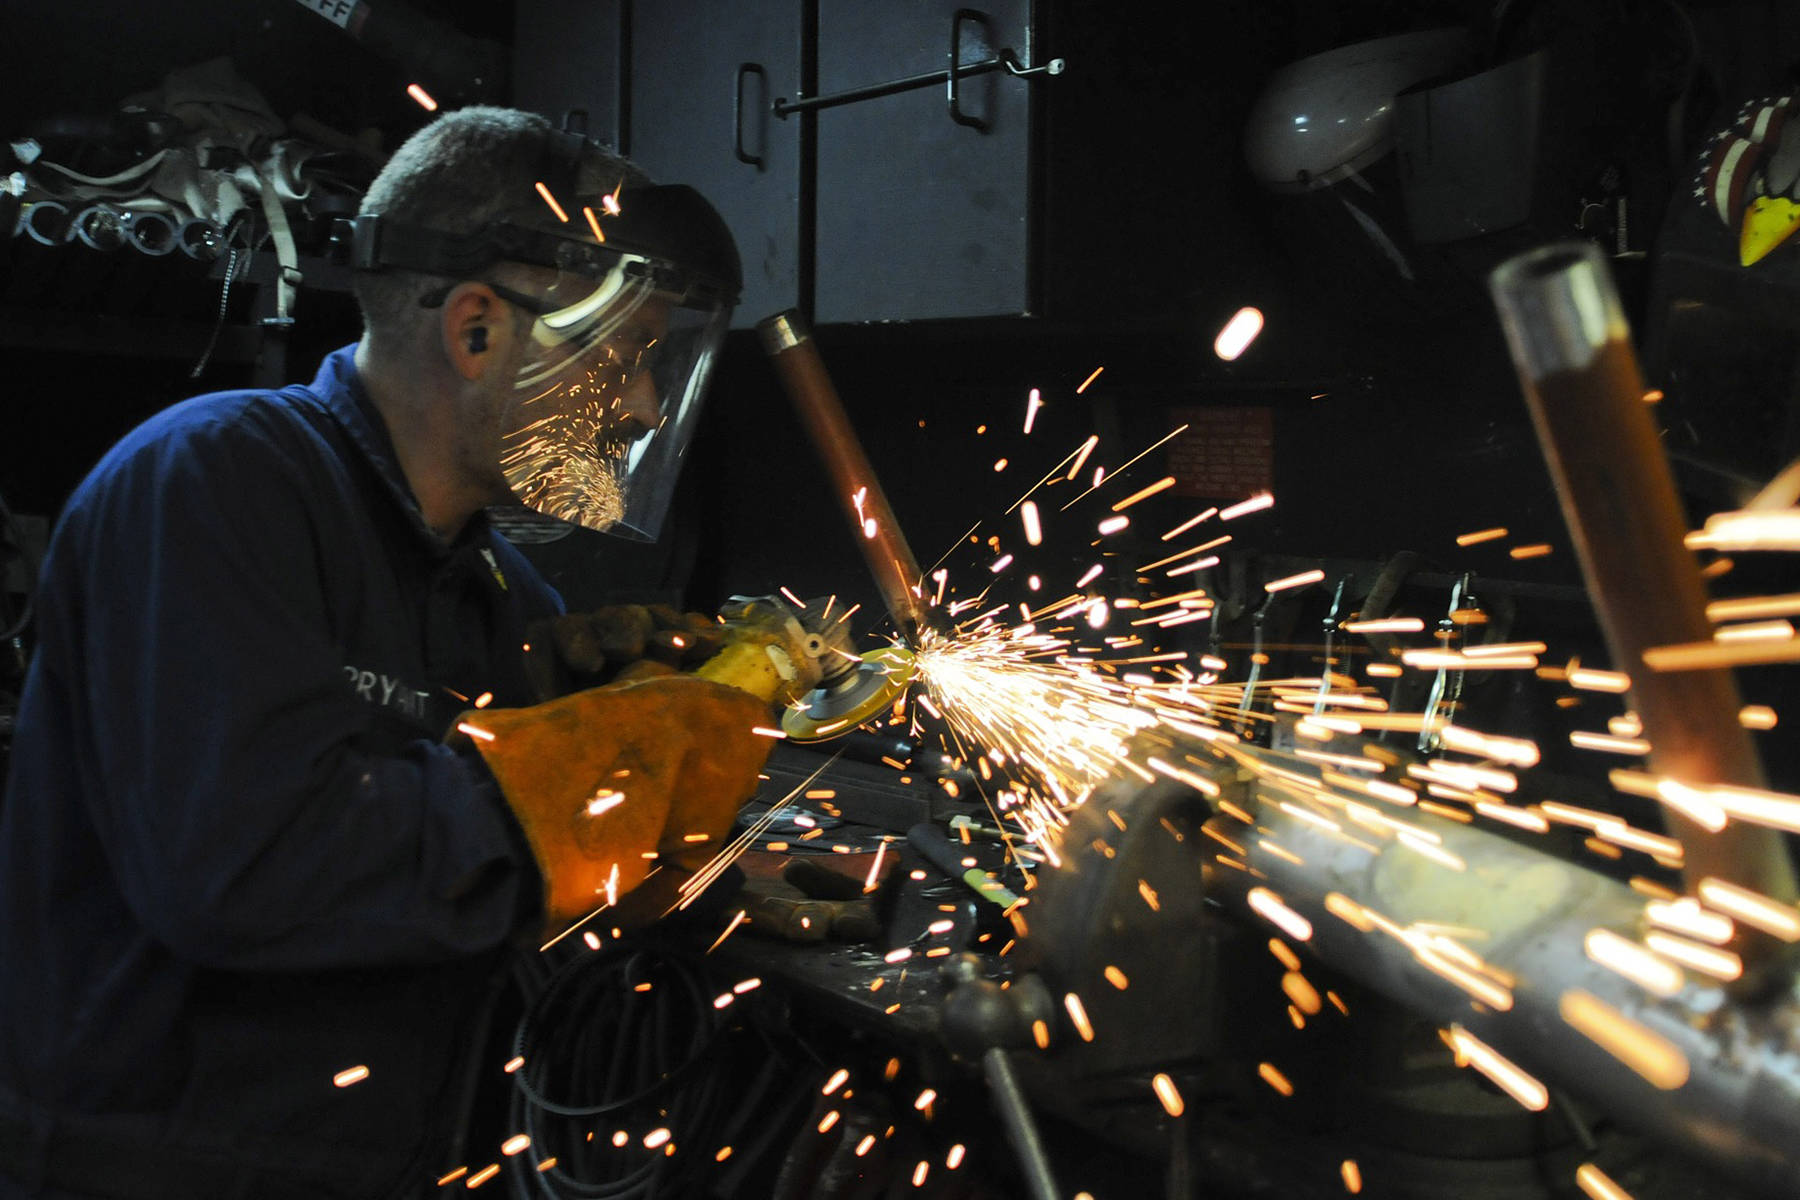 Free Training in Construction Welding this Spring